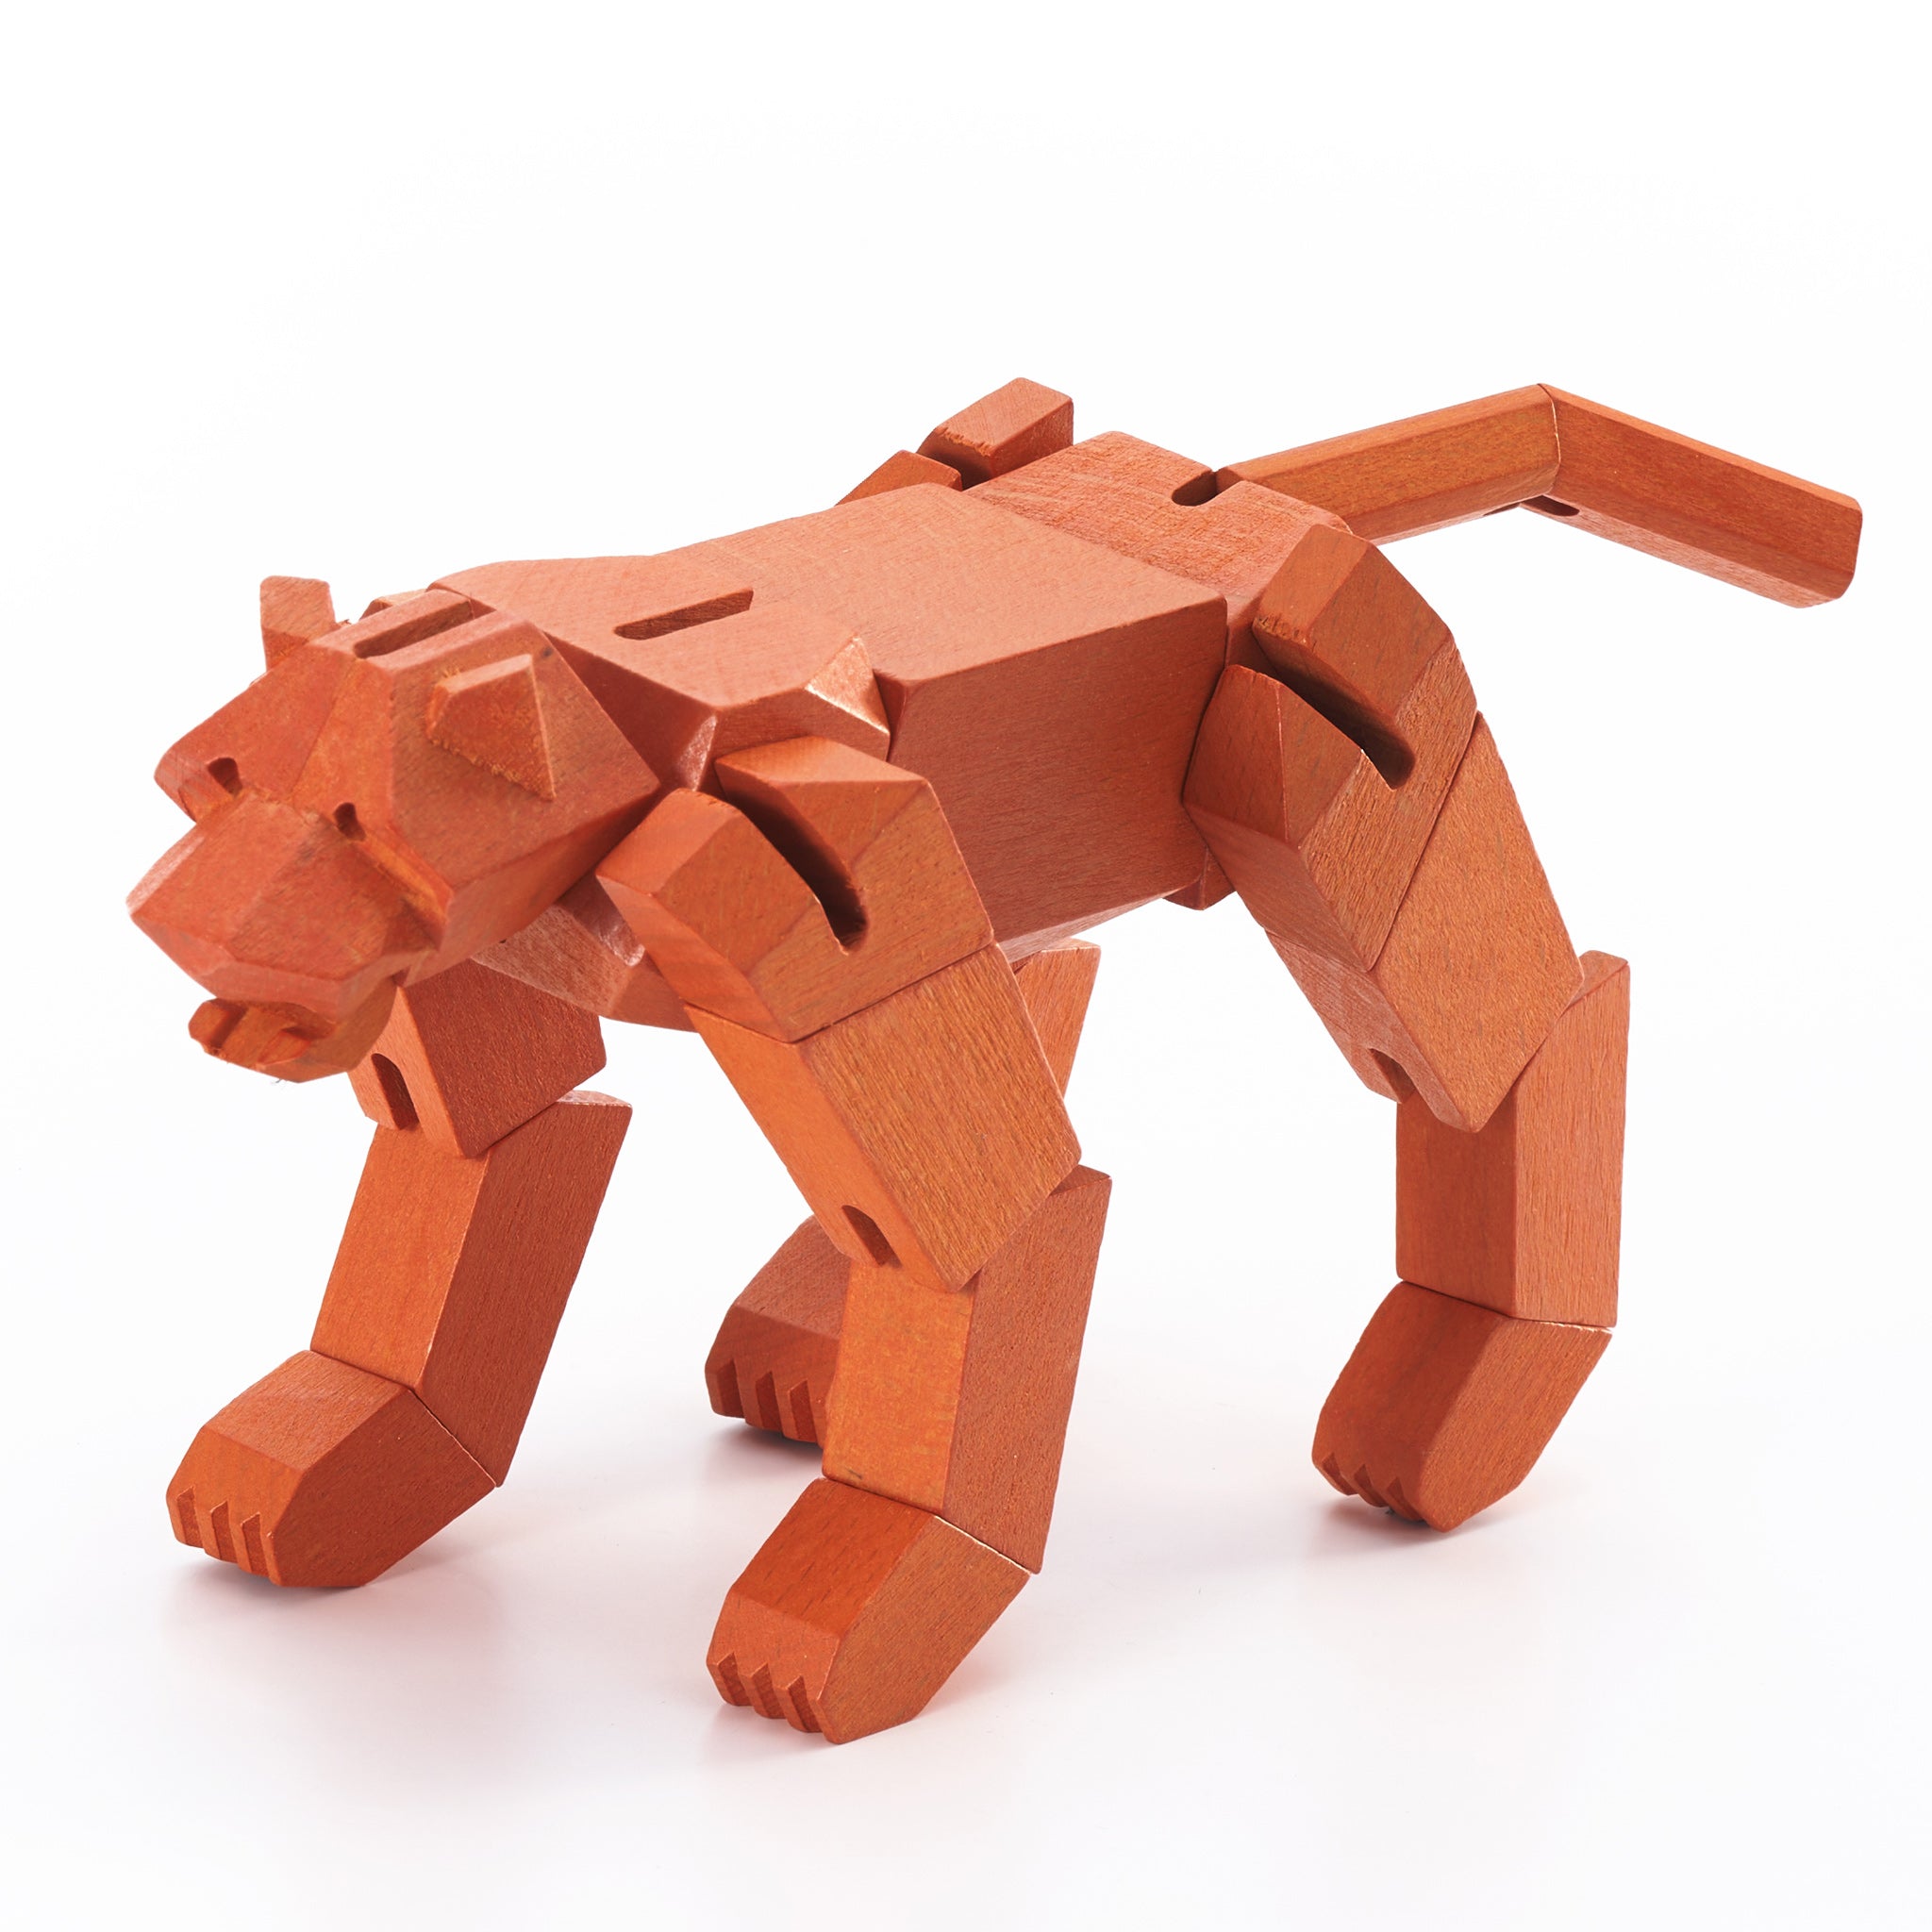 Morphits ® Tiger Wooden Toy Playset Puzzle Orange